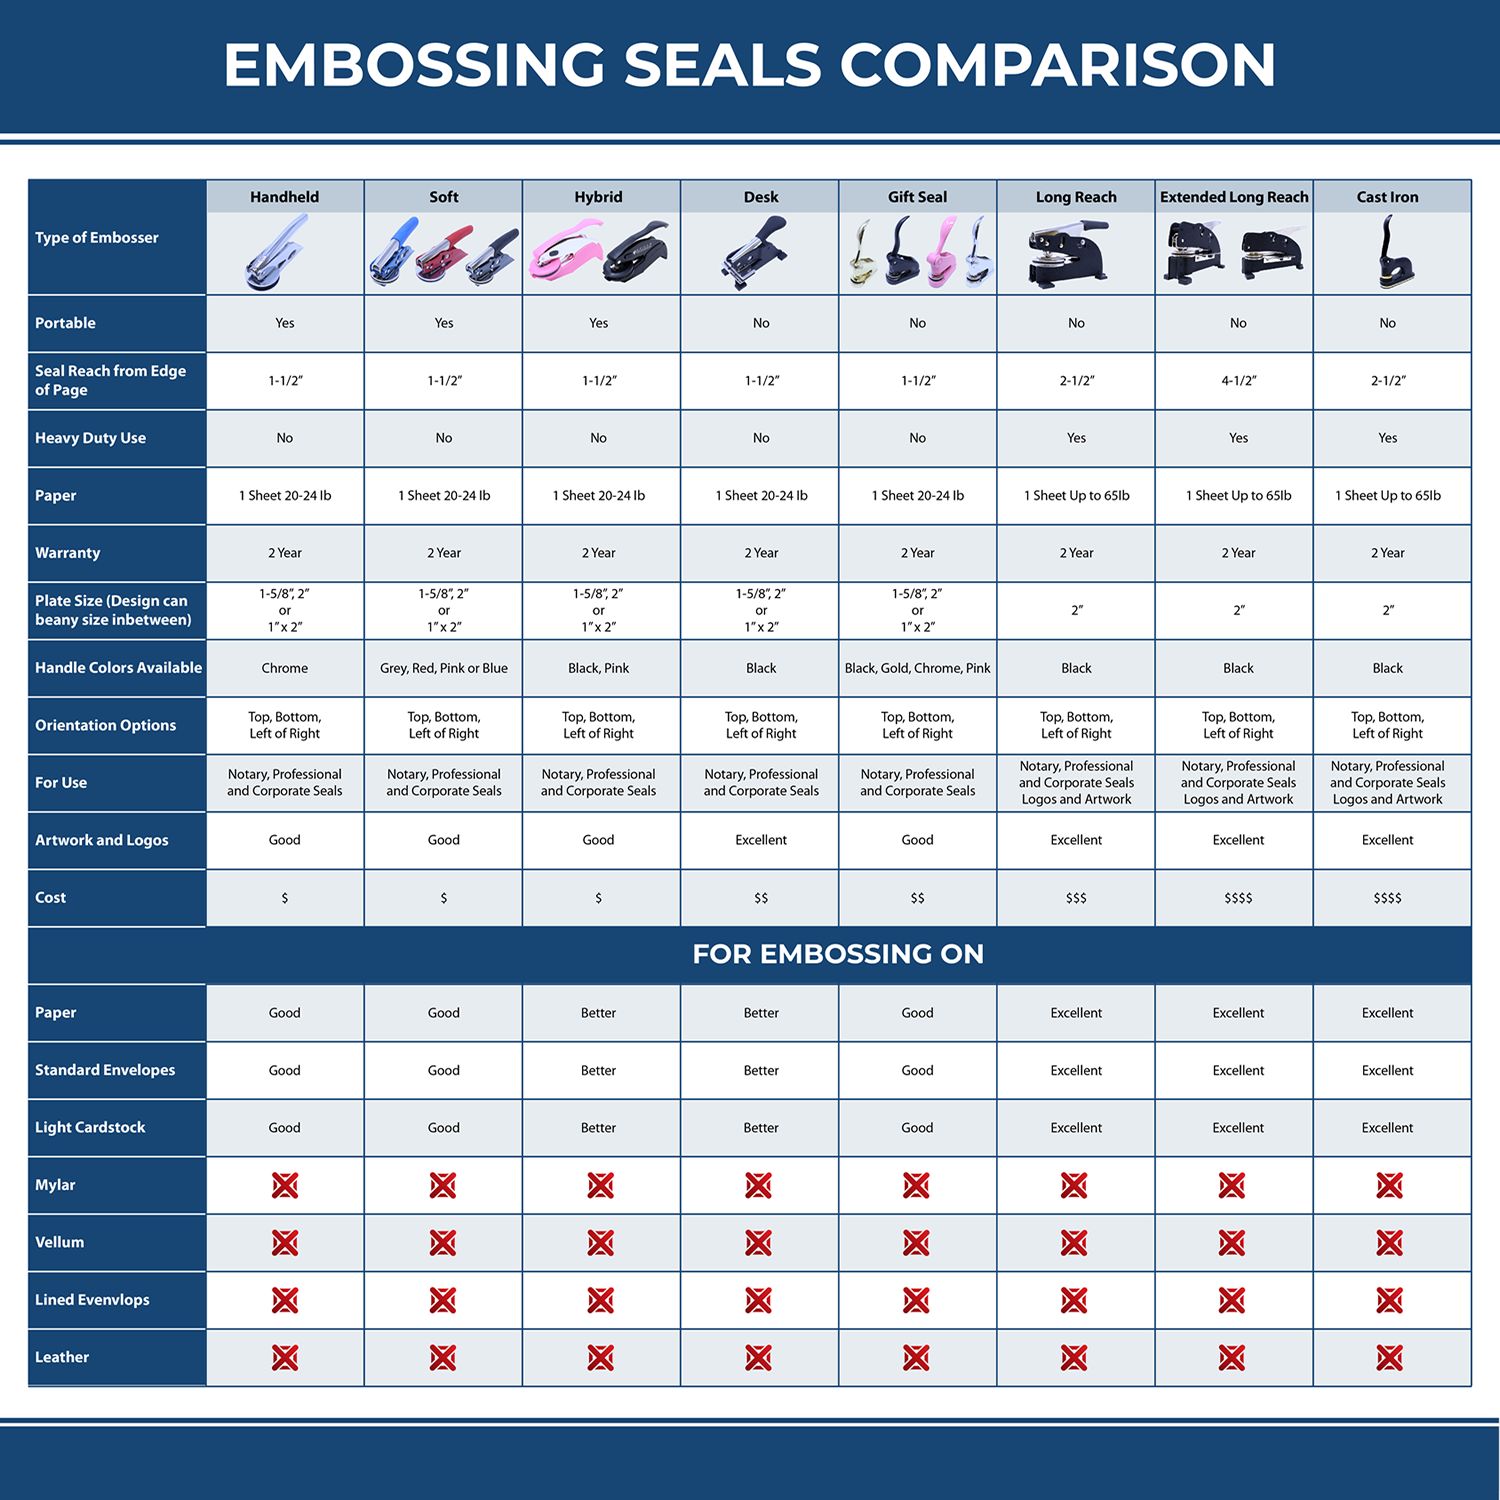 A comparison chart for the different types of mount models available for the Handheld New York Land Surveyor Seal.